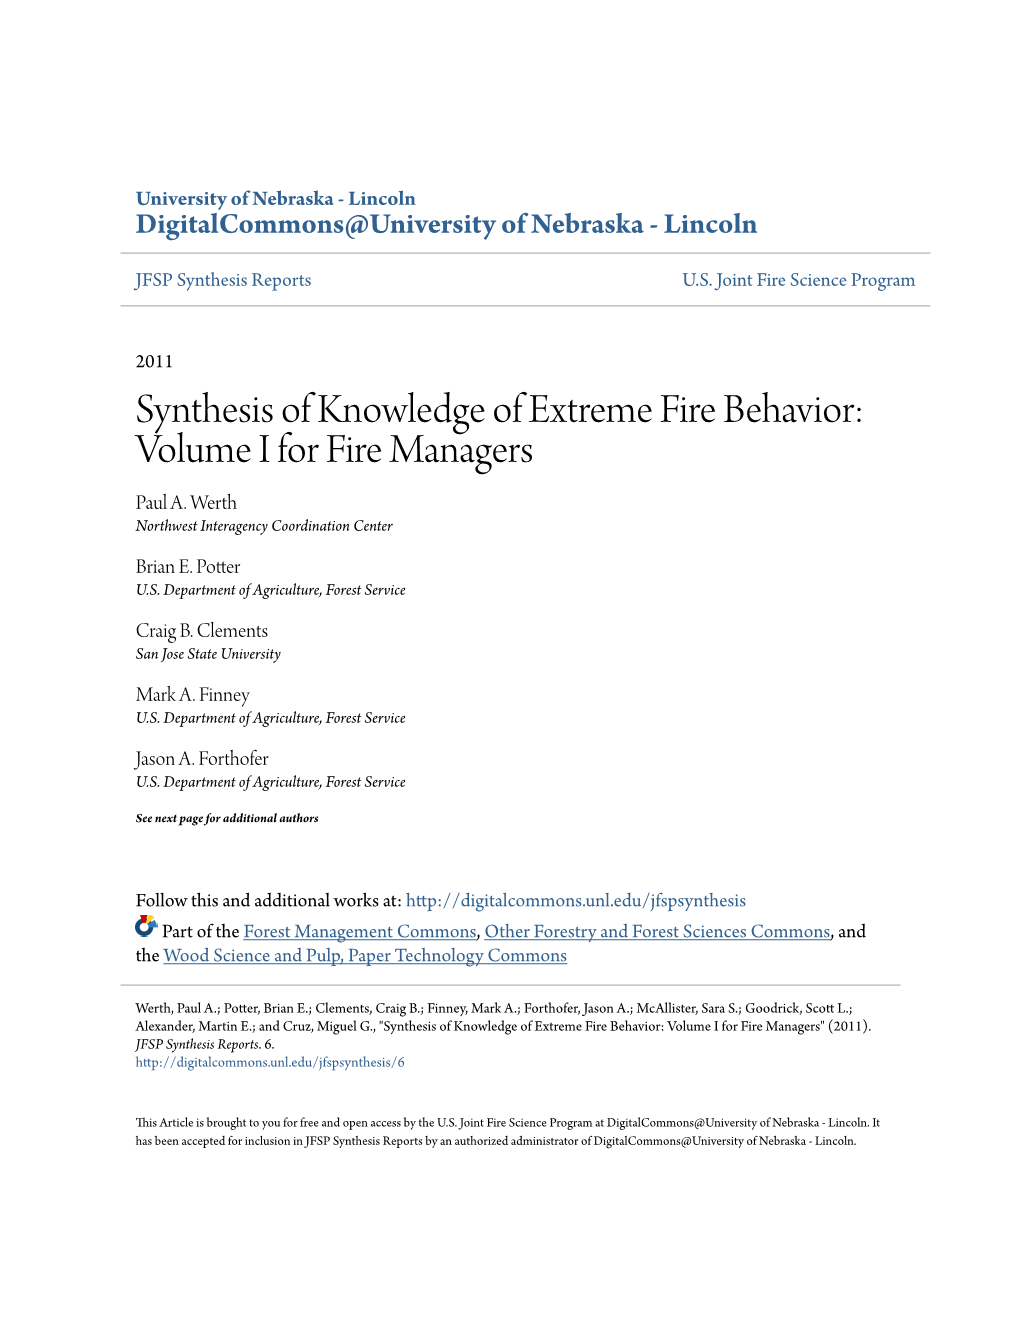 Synthesis of Knowledge of Extreme Fire Behavior: Volume I for Fire Managers Paul A